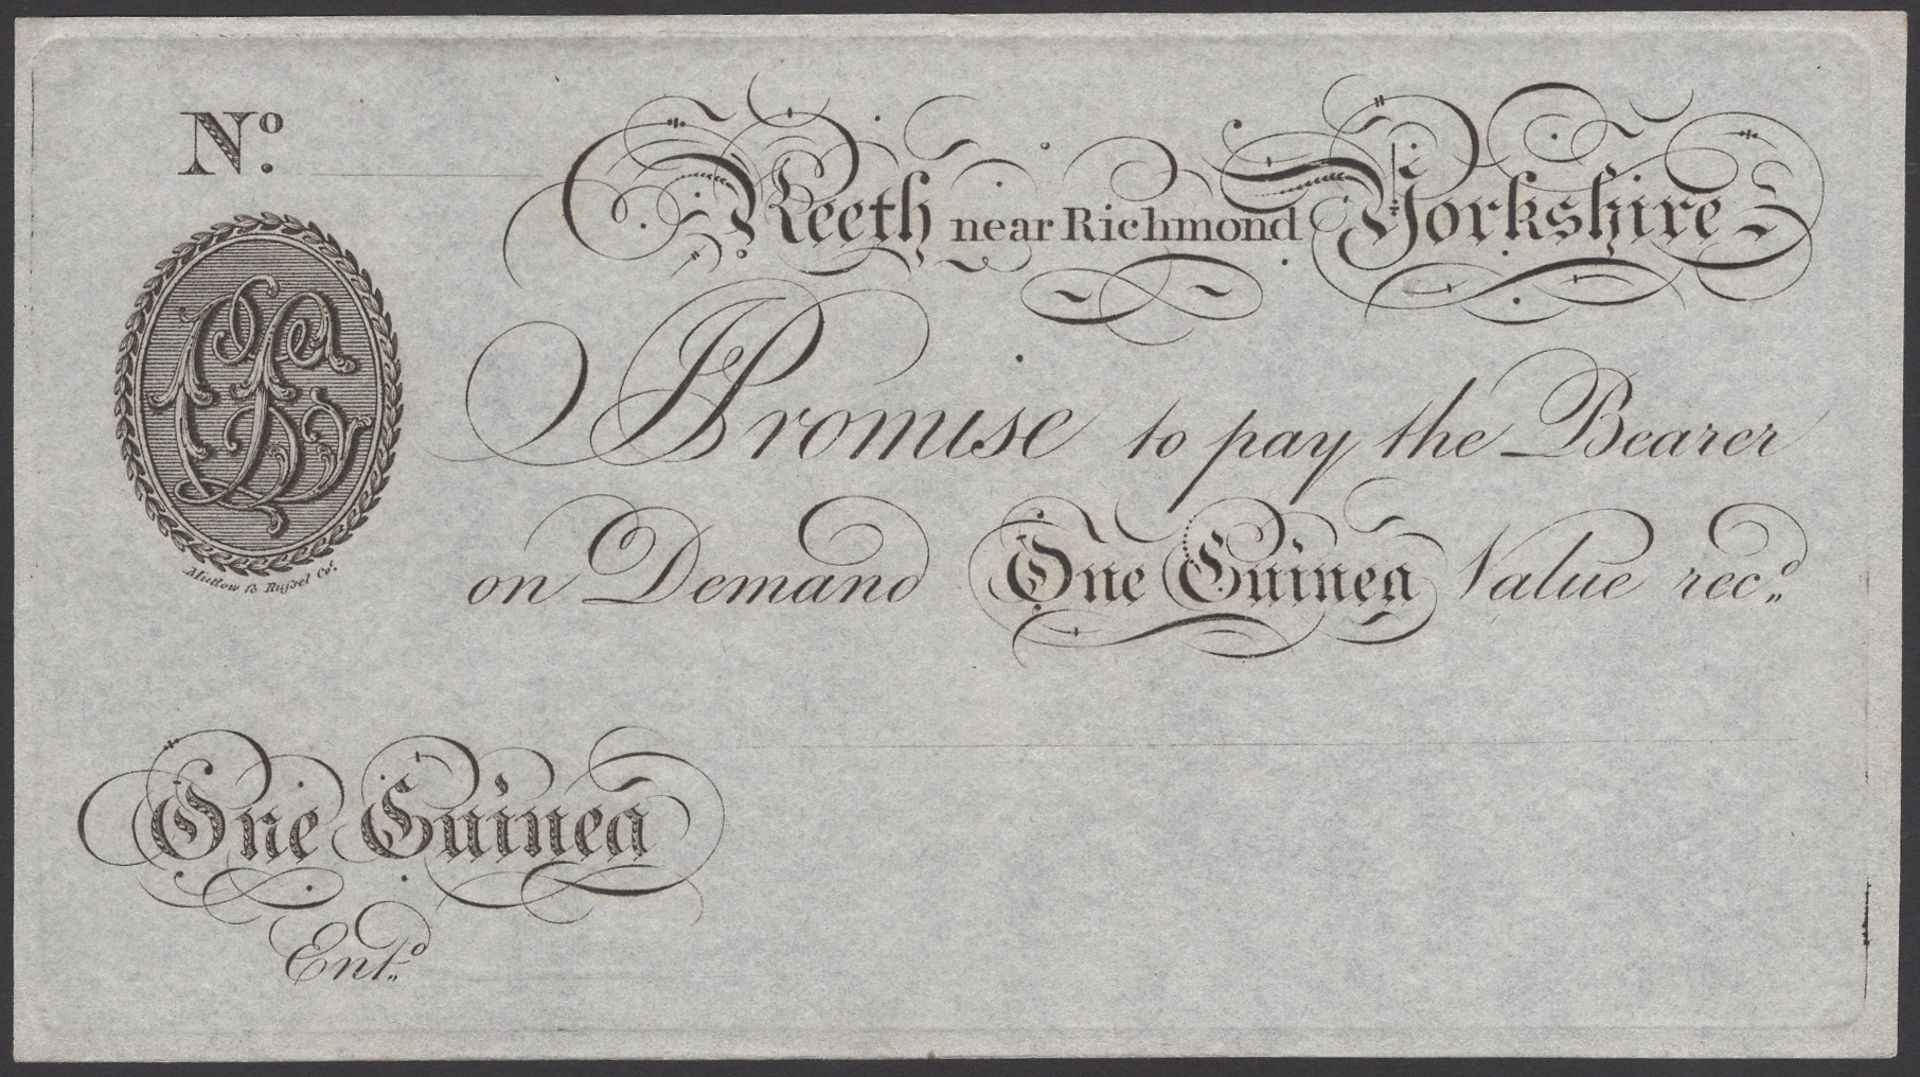 Reeth, Near Richmond Yorkshire, for Charles Lonsdale, unissued 1 Guinea, ND (18-), no signat...